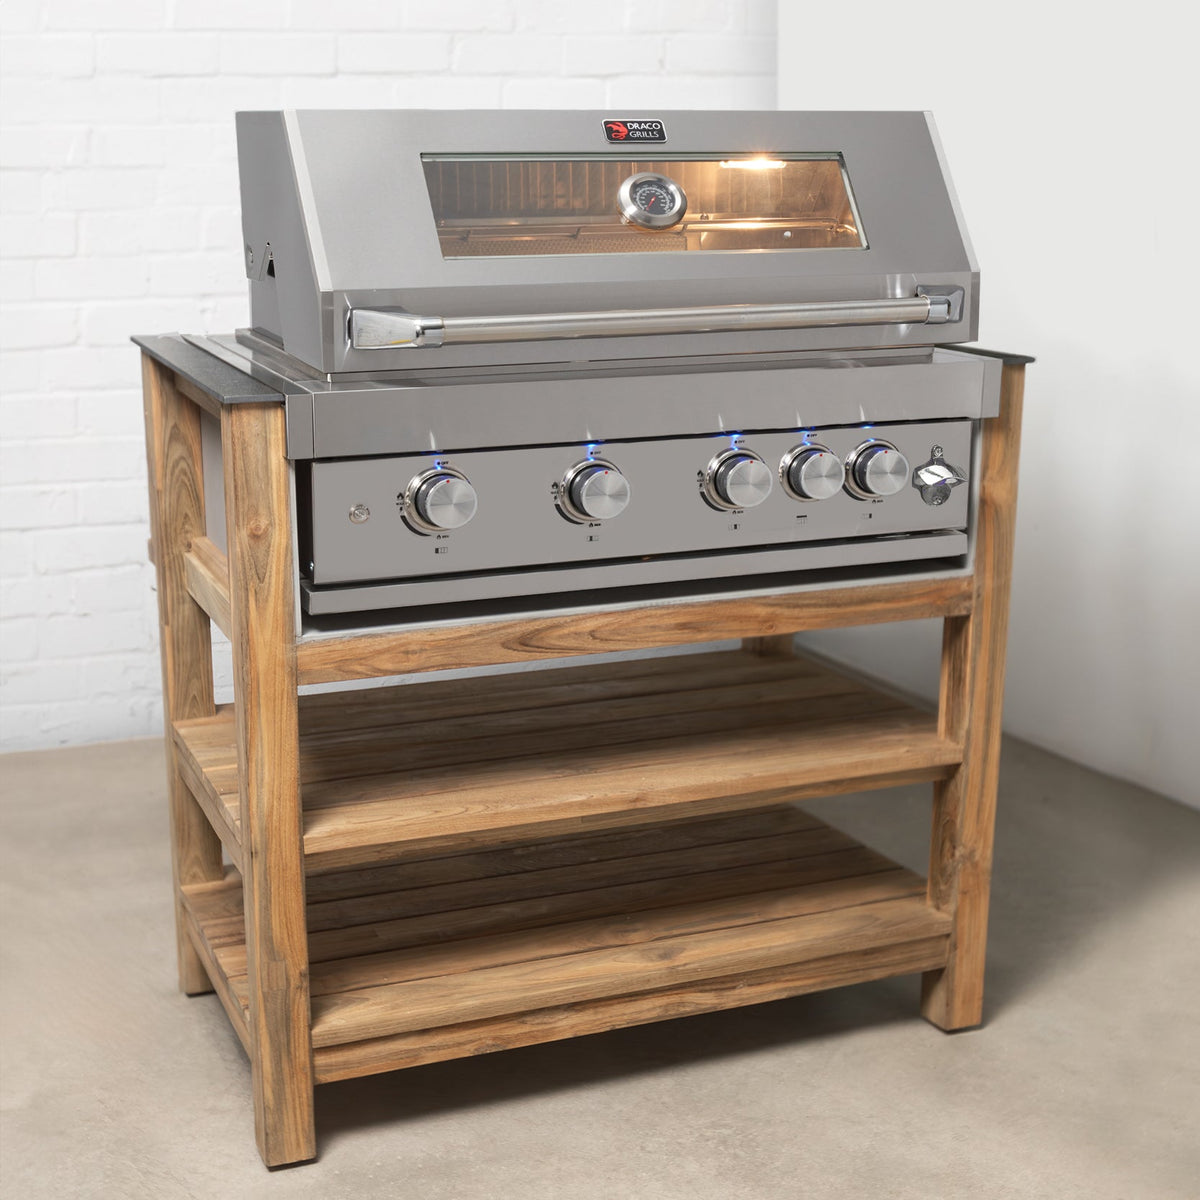 Draco Grills Teak 4 Burner Outdoor Kitchen with Modular Single Cupboard and Triple Drawer Unit